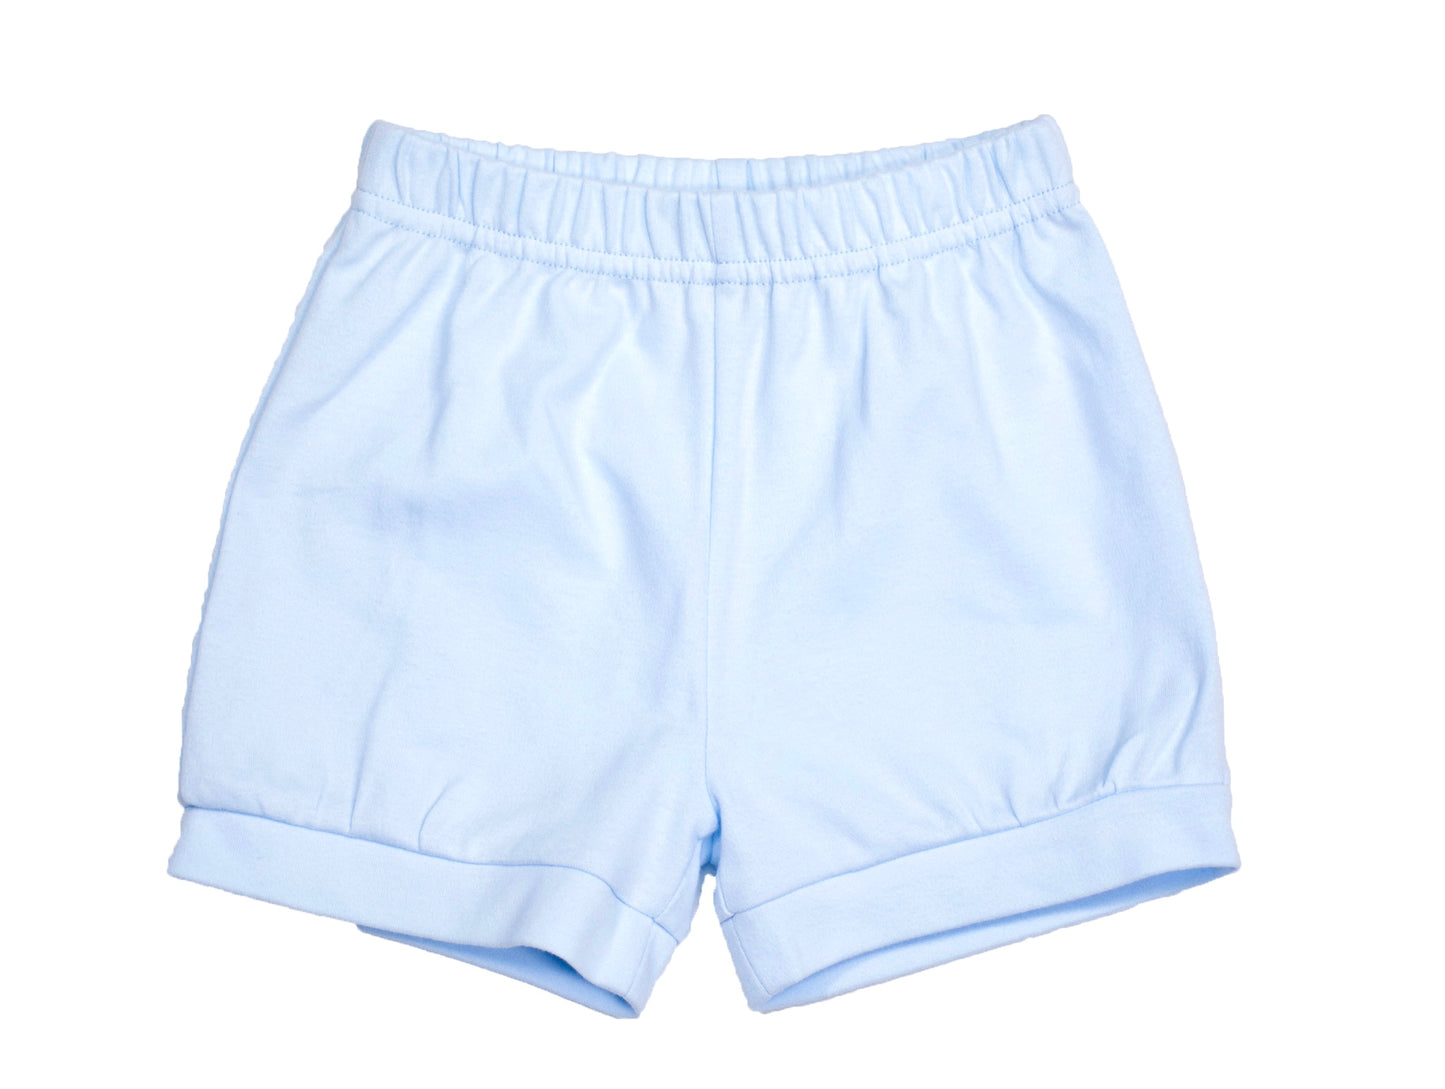 Solid blue banded shorts